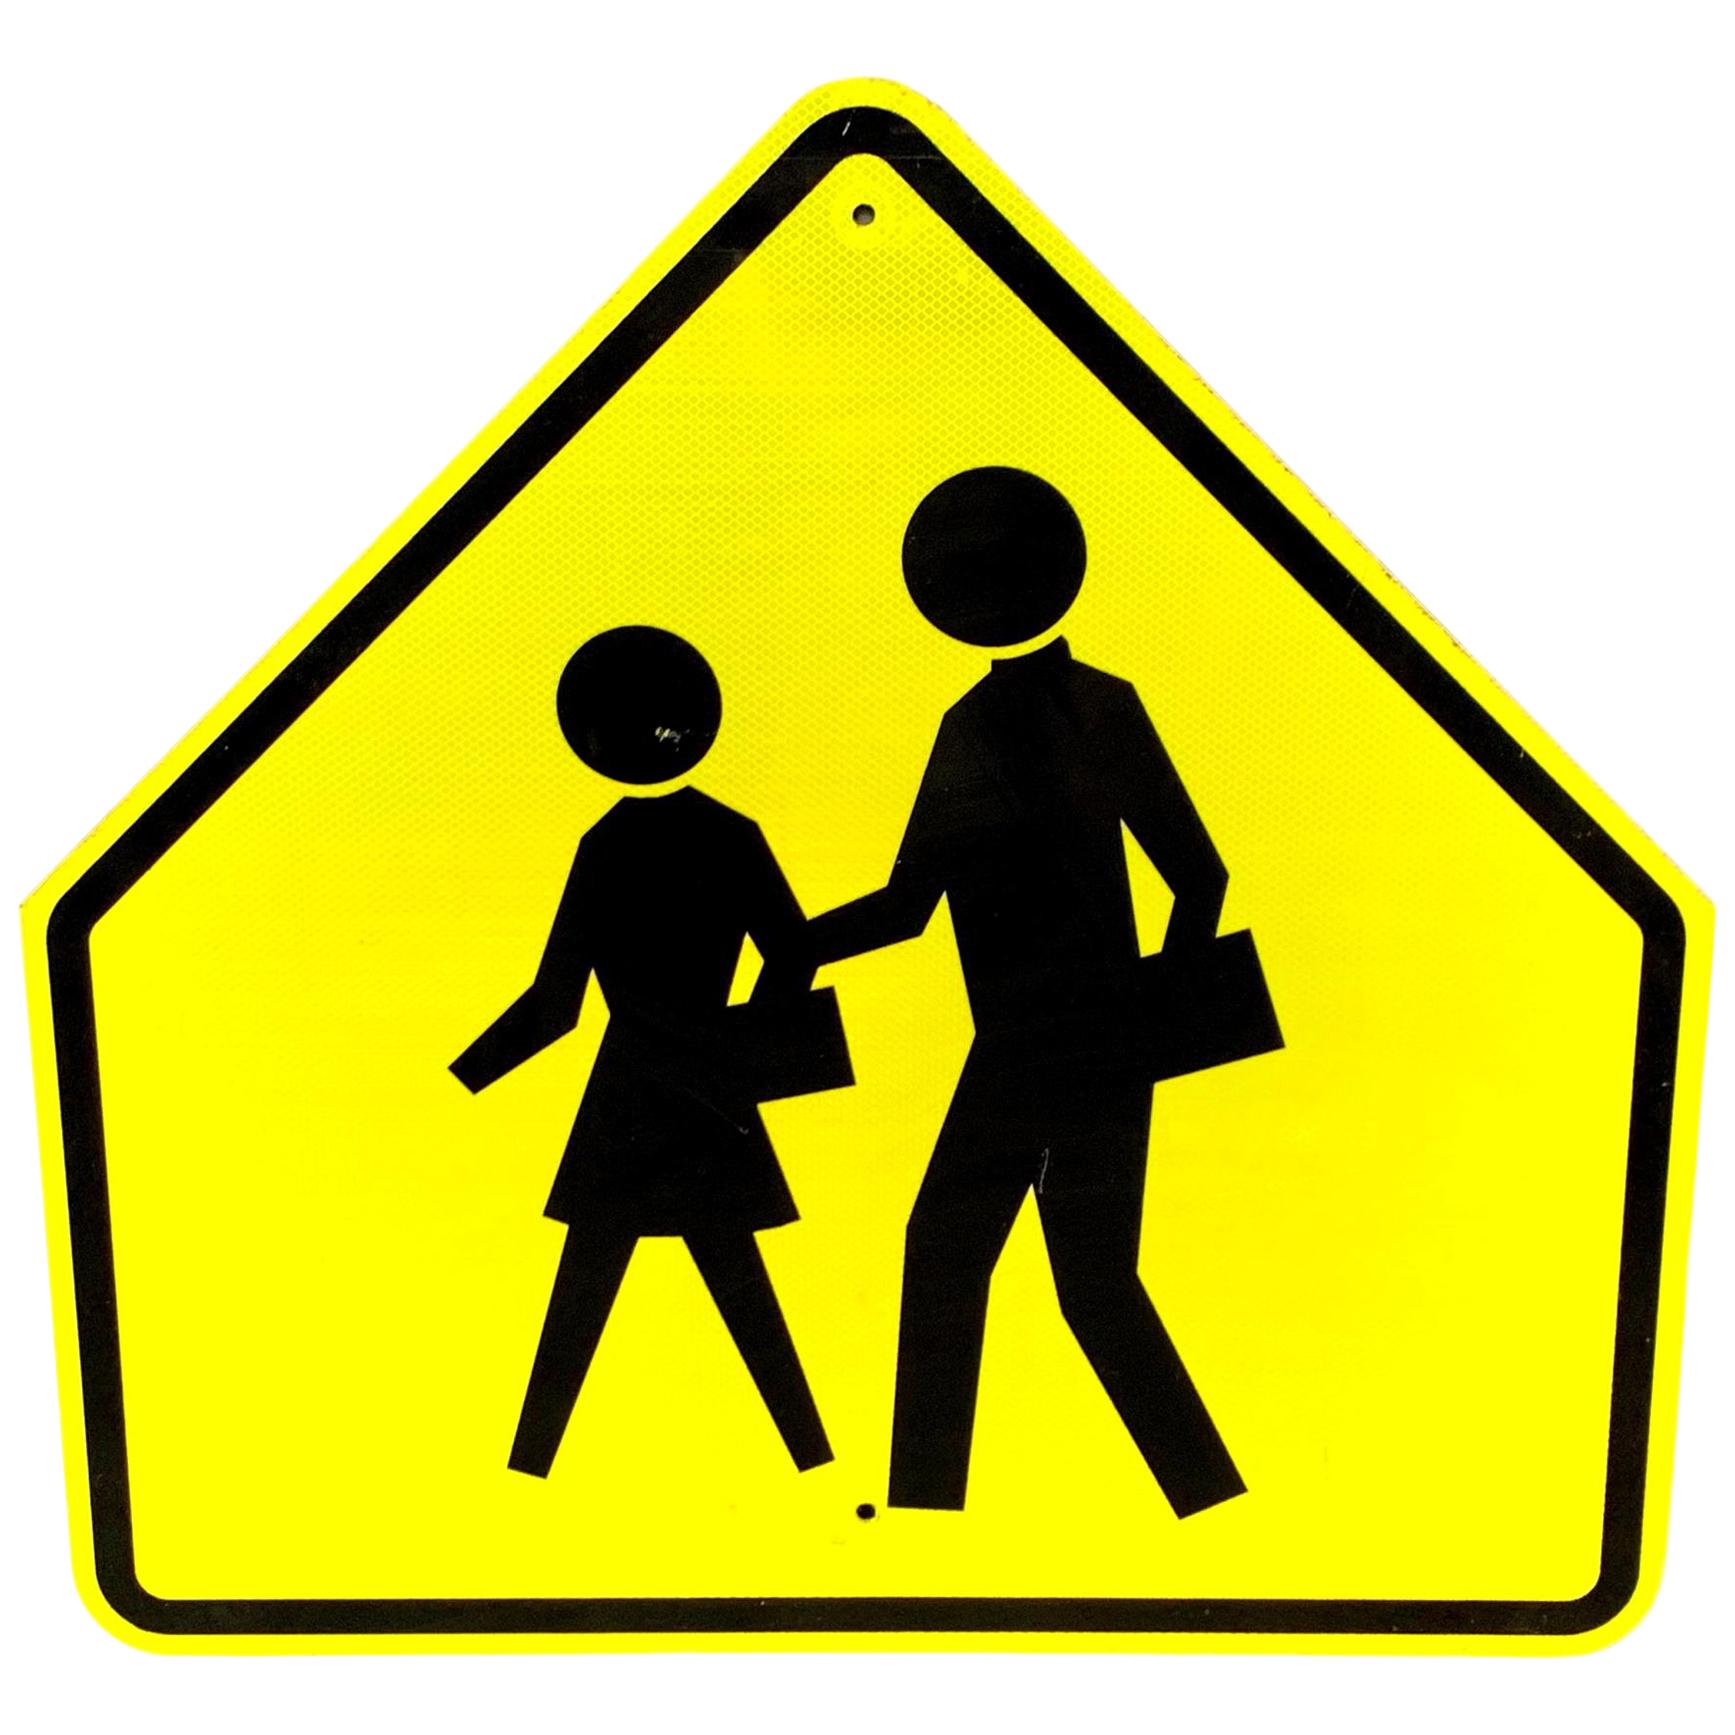 Acid Yellow Reflective Pedestrian Road Sign from Los Angeles For Sale